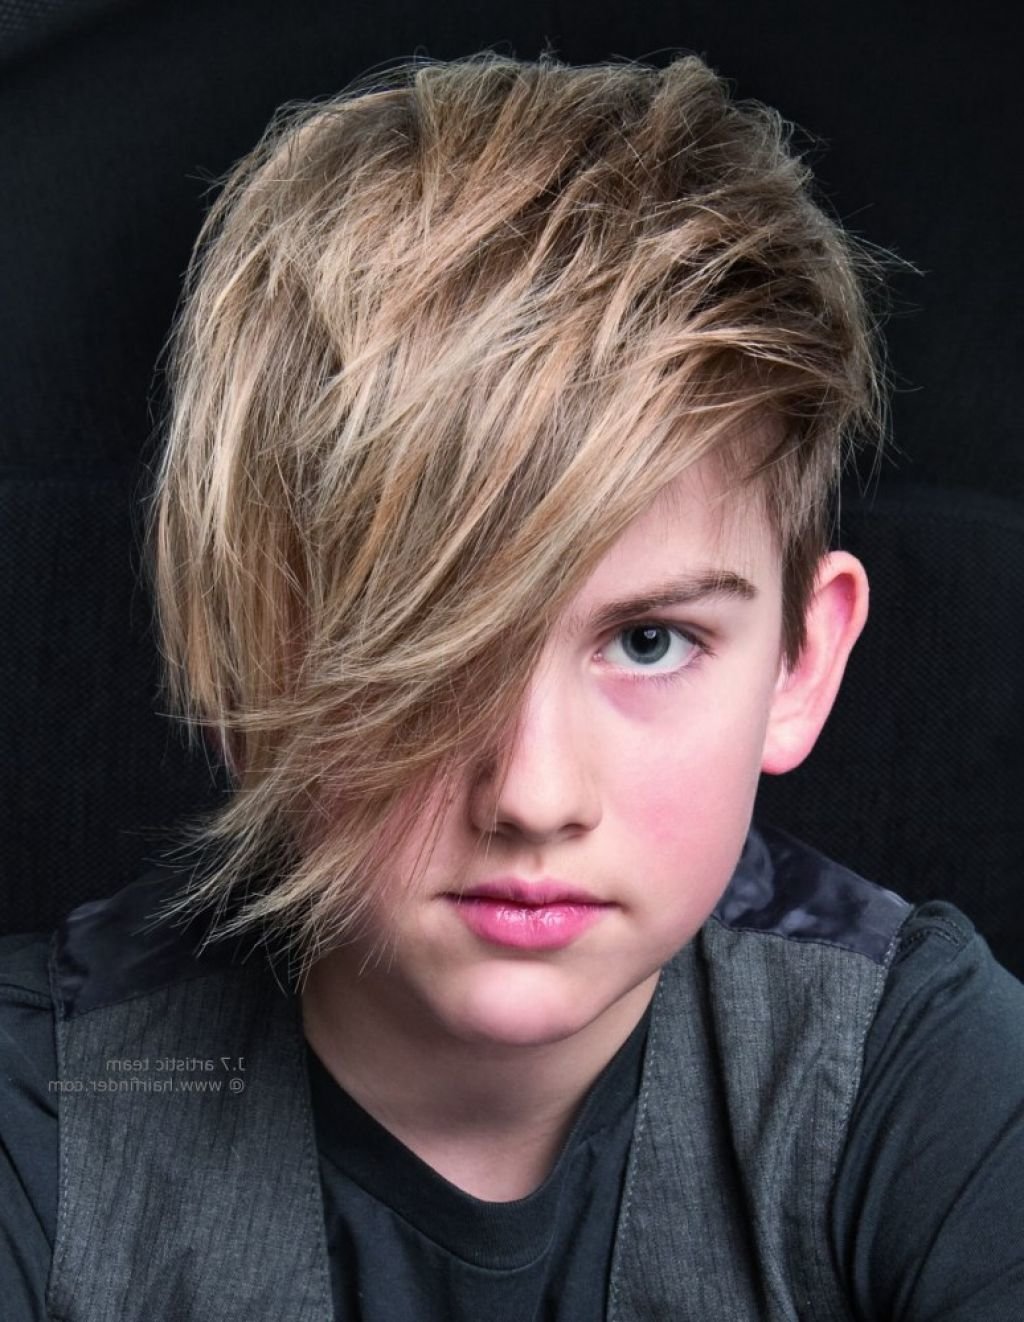 Hairstyles For Boys 14 15 Years Old 65 Photos Options For